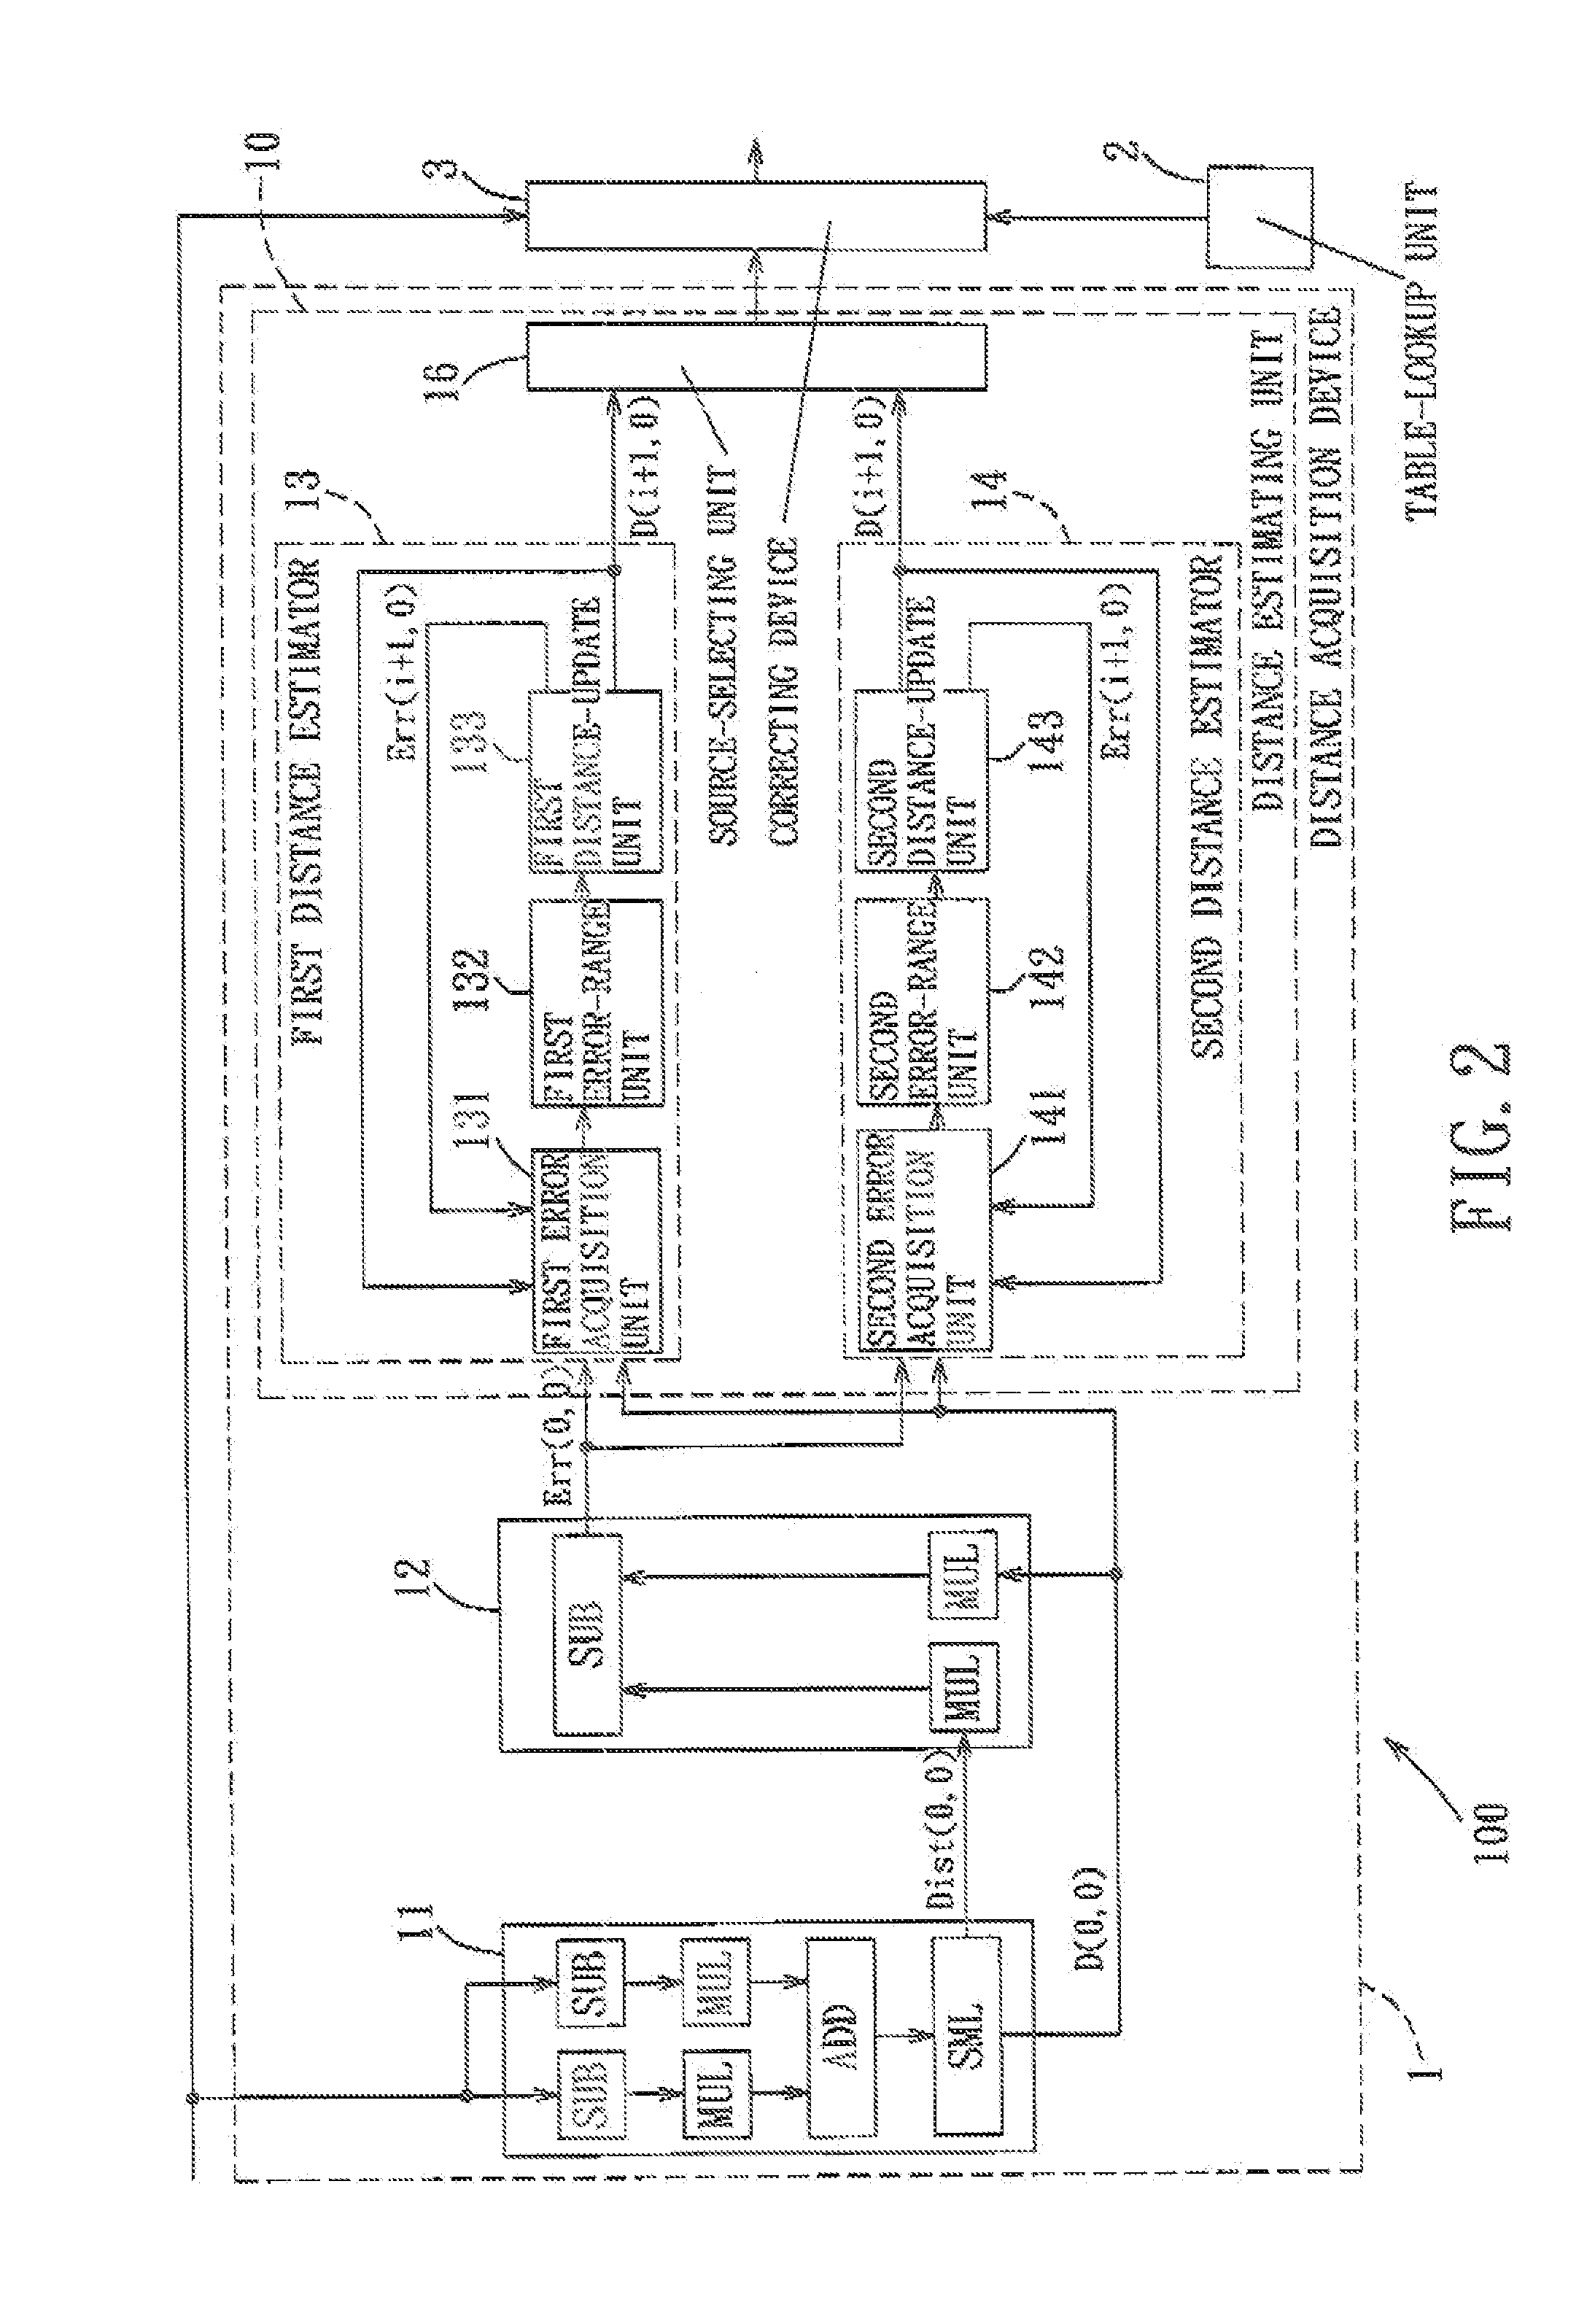 Distance acquisition device, lens correcting system and method applying the distance acquisition device